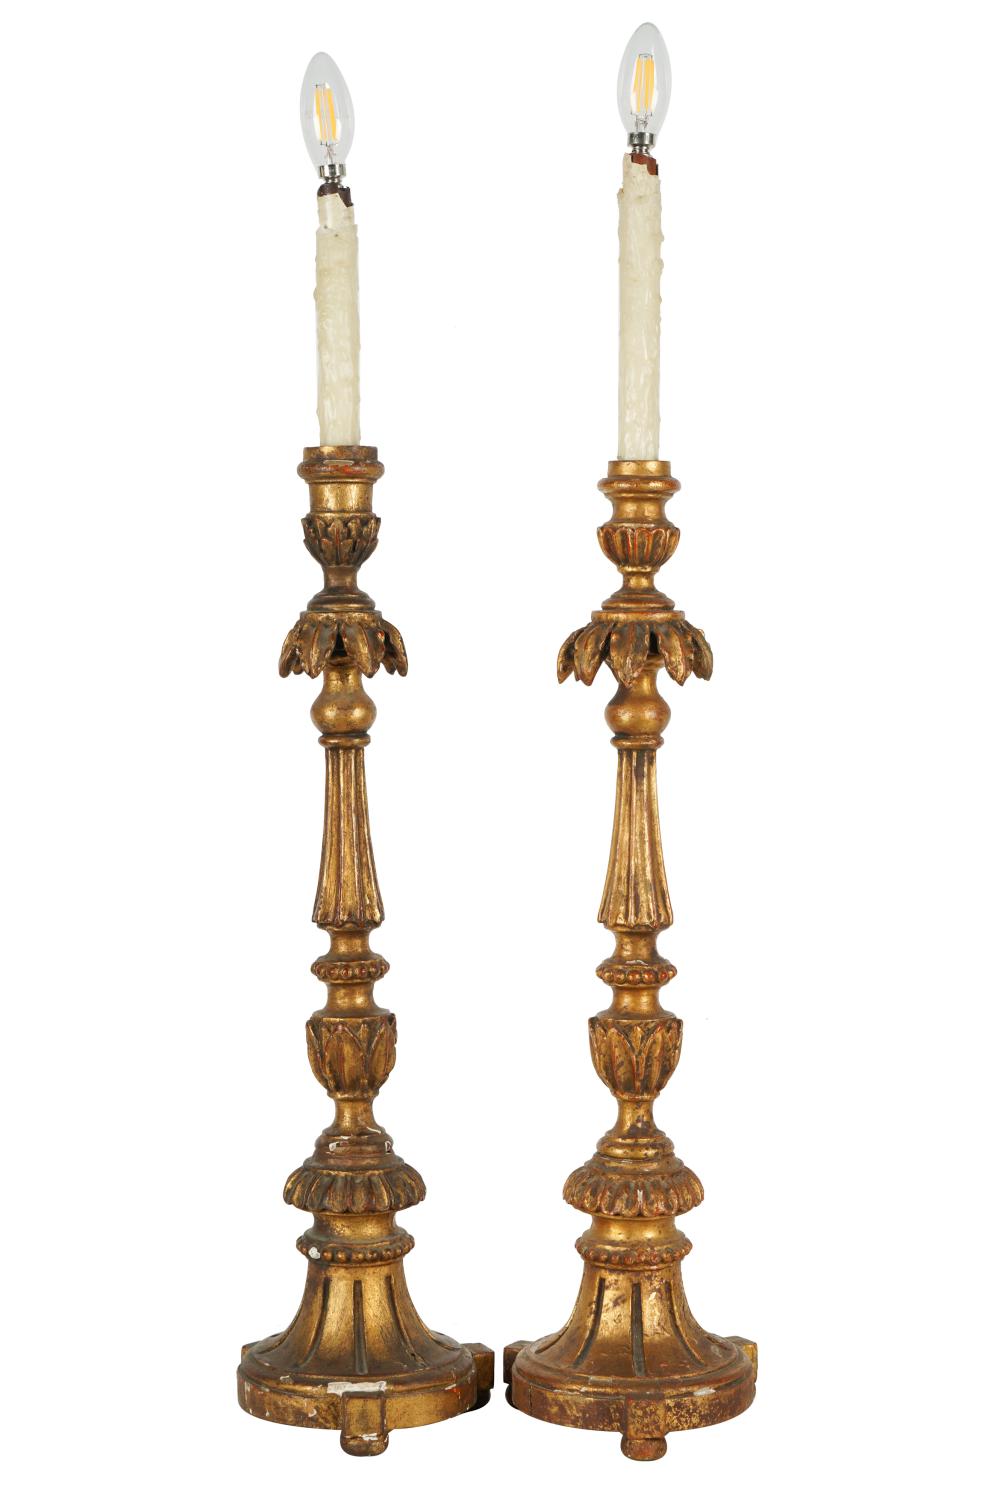 PAIR OF NEOCLASSICAL-STYLE GILTWOOD